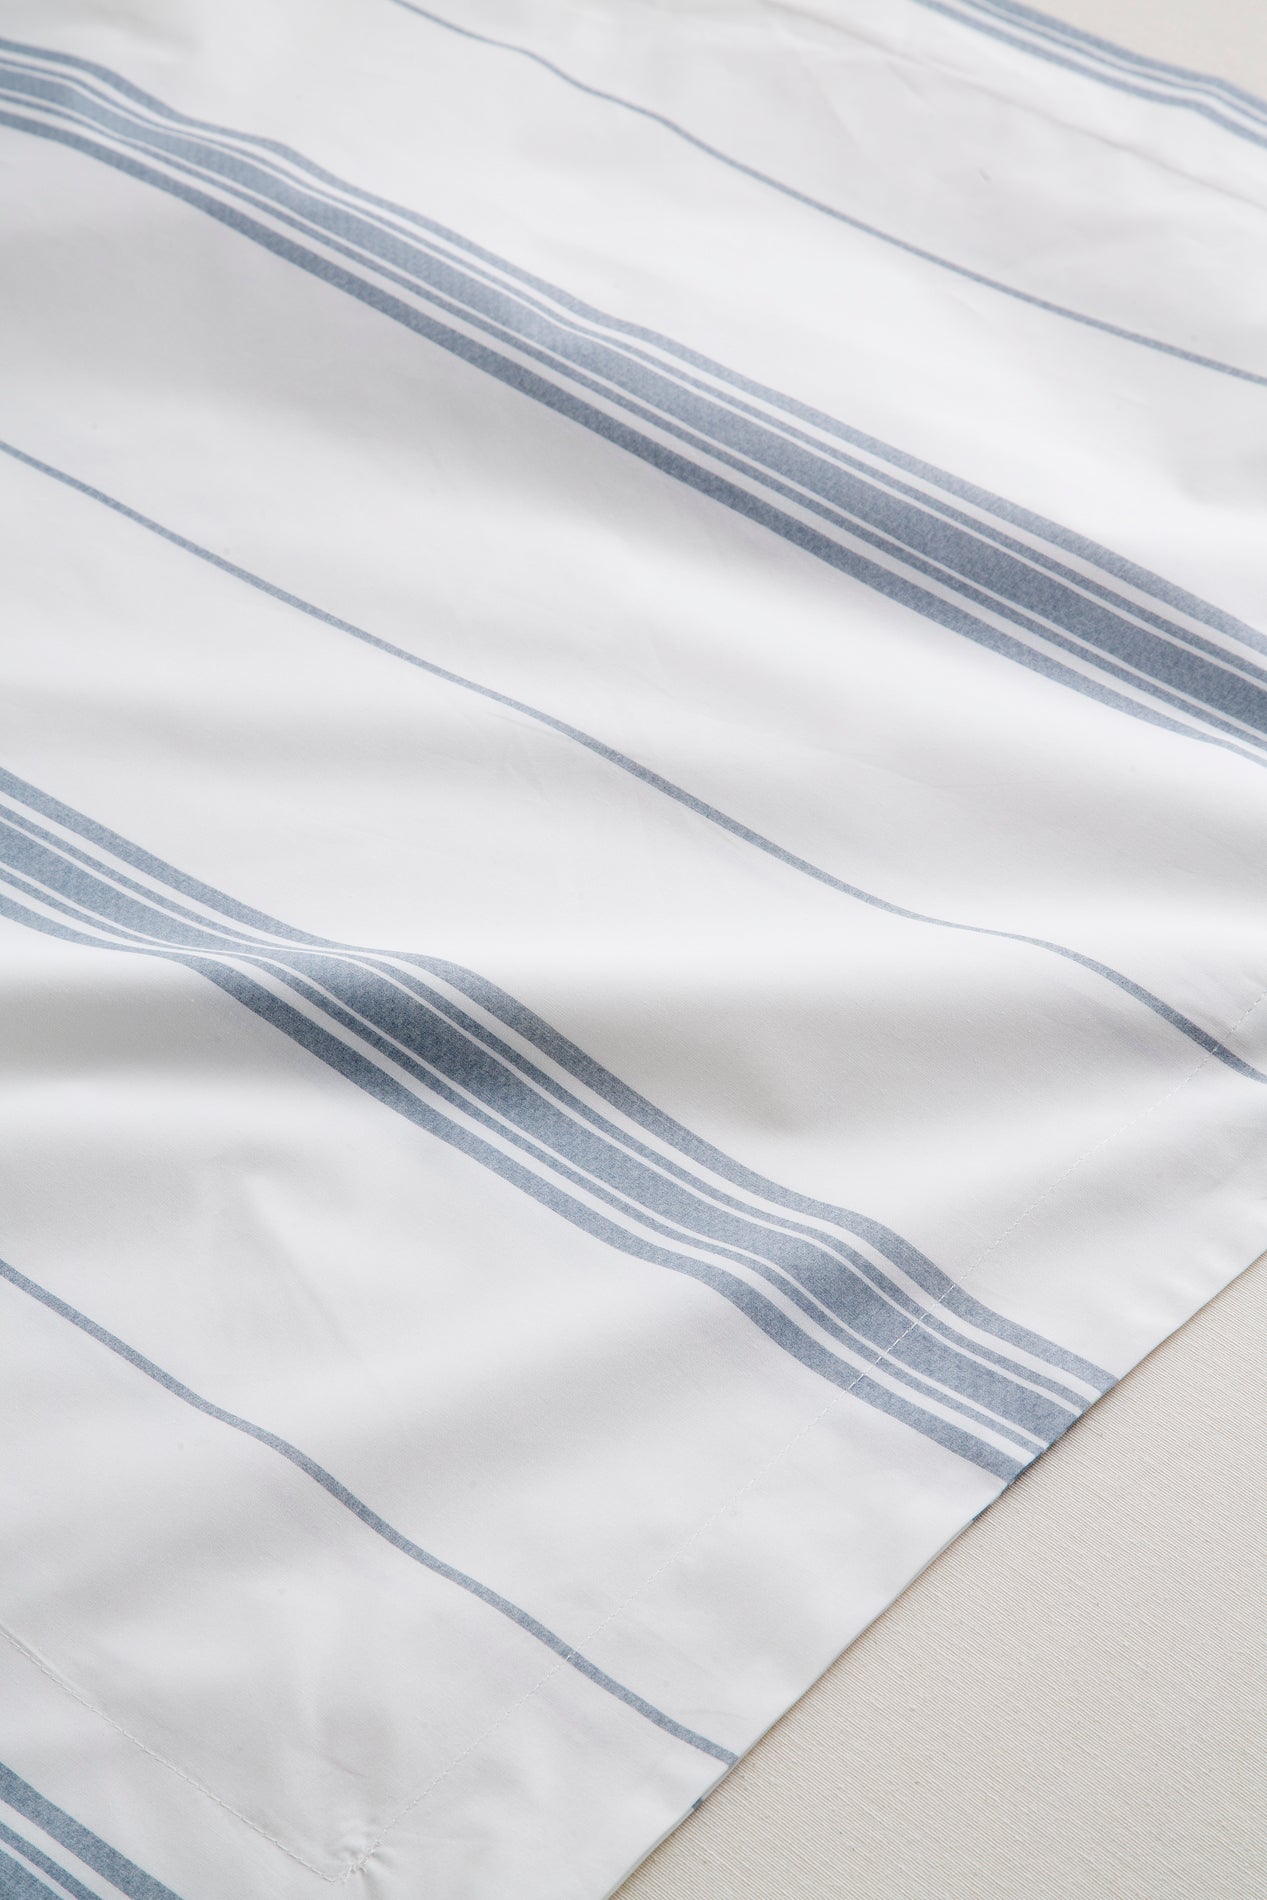 Percale Cotton Top Sheet 200h Bed 90 - Blue Stripes